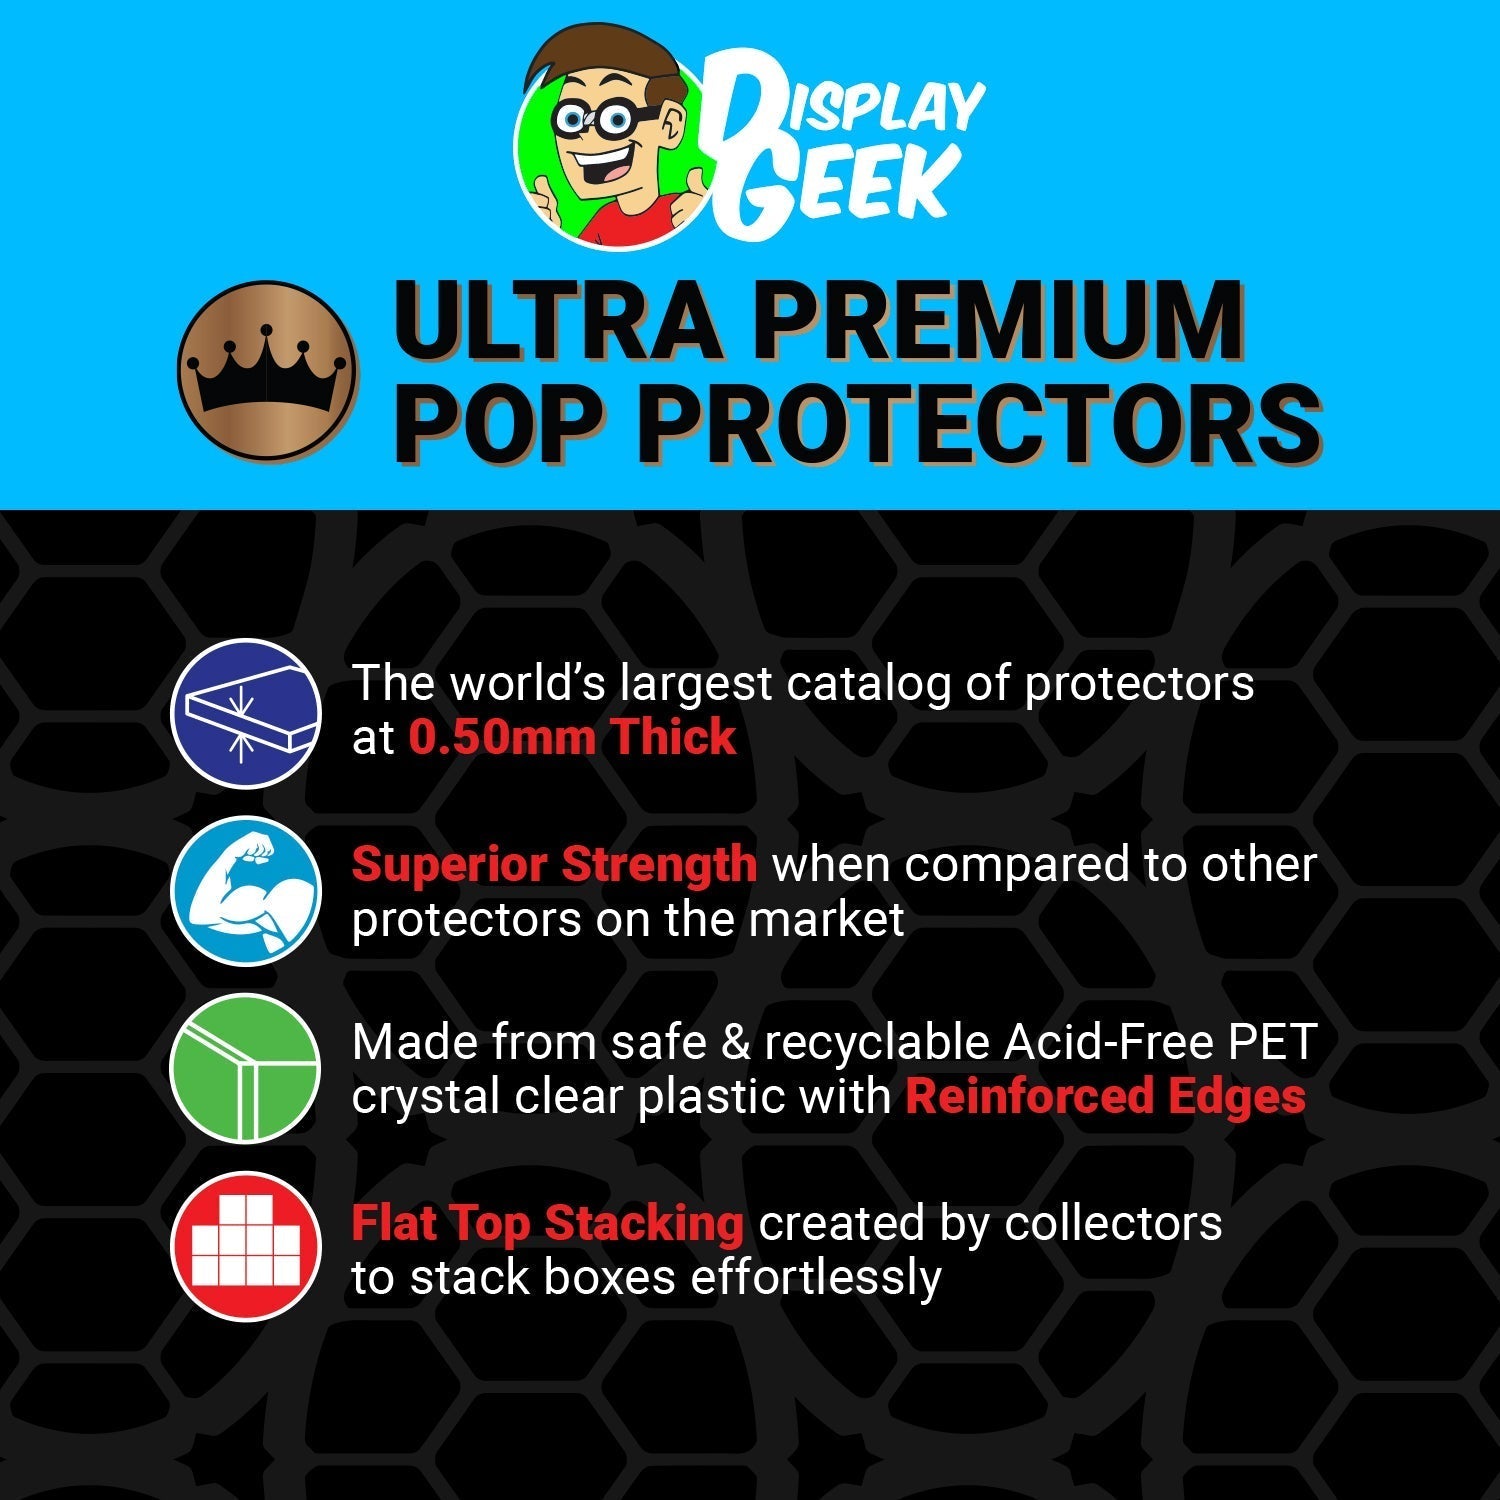 Pop Protector for Betty Boop Chase Black & White Funko Pop Pez - PPG Pop Protector Guide Search Created by Display Geek